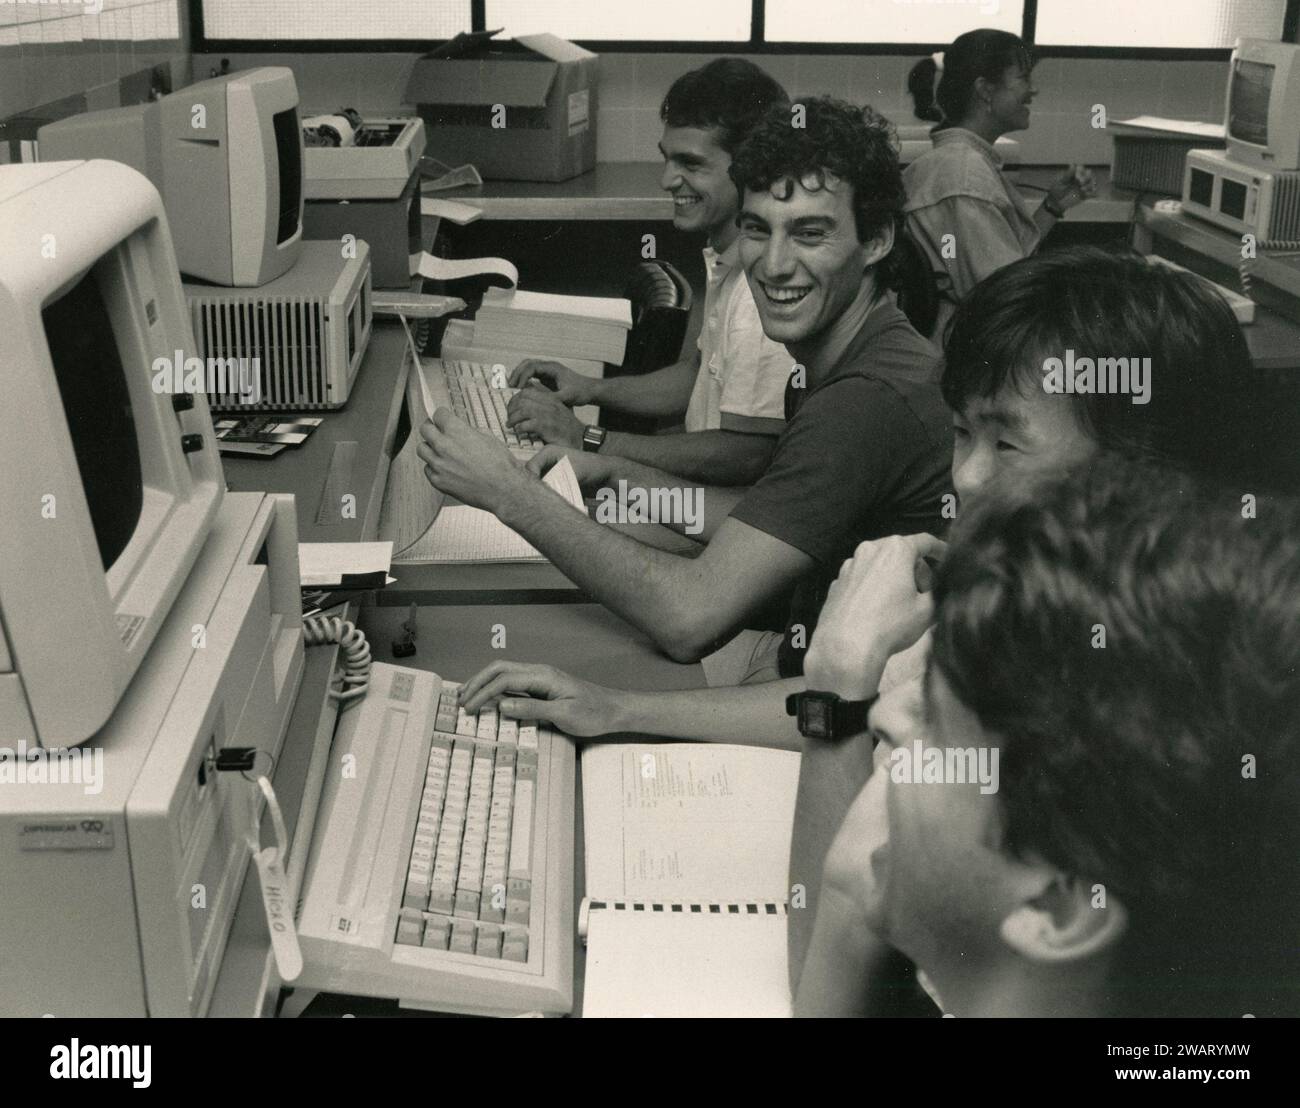 Boys operating at personal computer workstation, 1980s Stock Photo